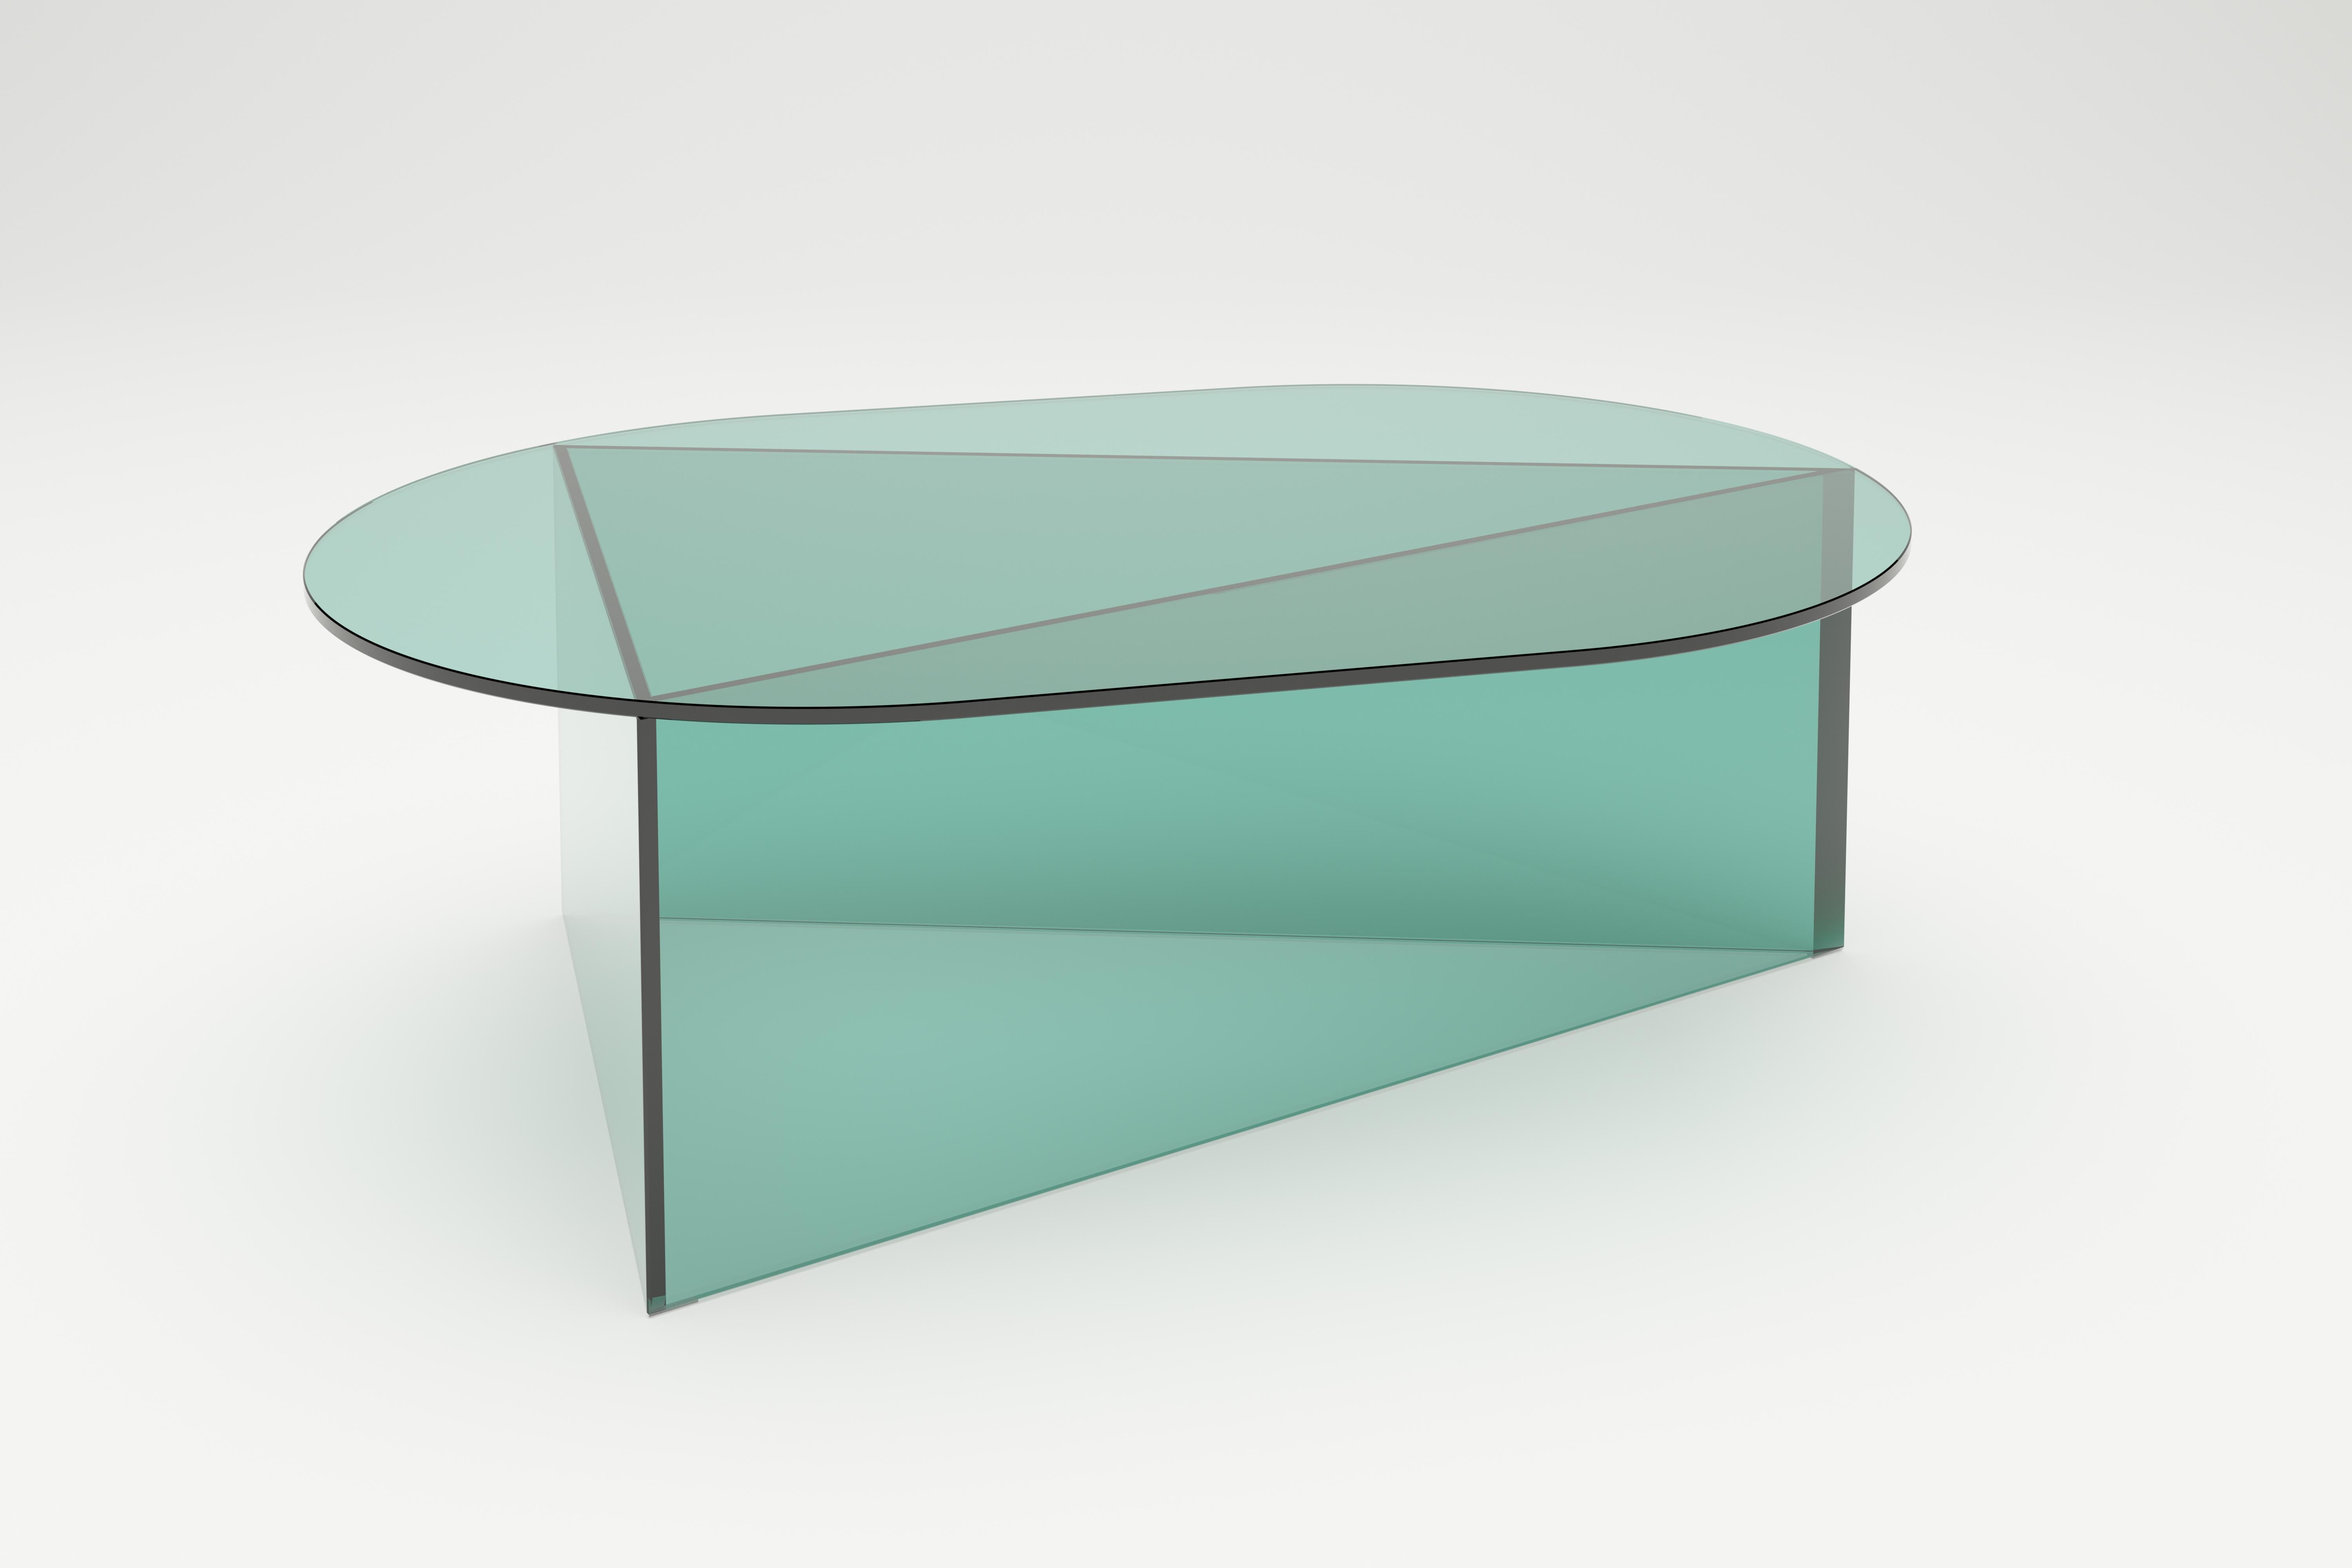 Clear glass Prisma Oblong 105 coffee table by Sebastian Scherer
Dimensions: D105 x W70 x H35 cm
Materials: Solid coloured glass.
Weight: 36.2 kg.
Also Available: Glass: clear white / clear green / clear blue / clear bronze / clear black / satin